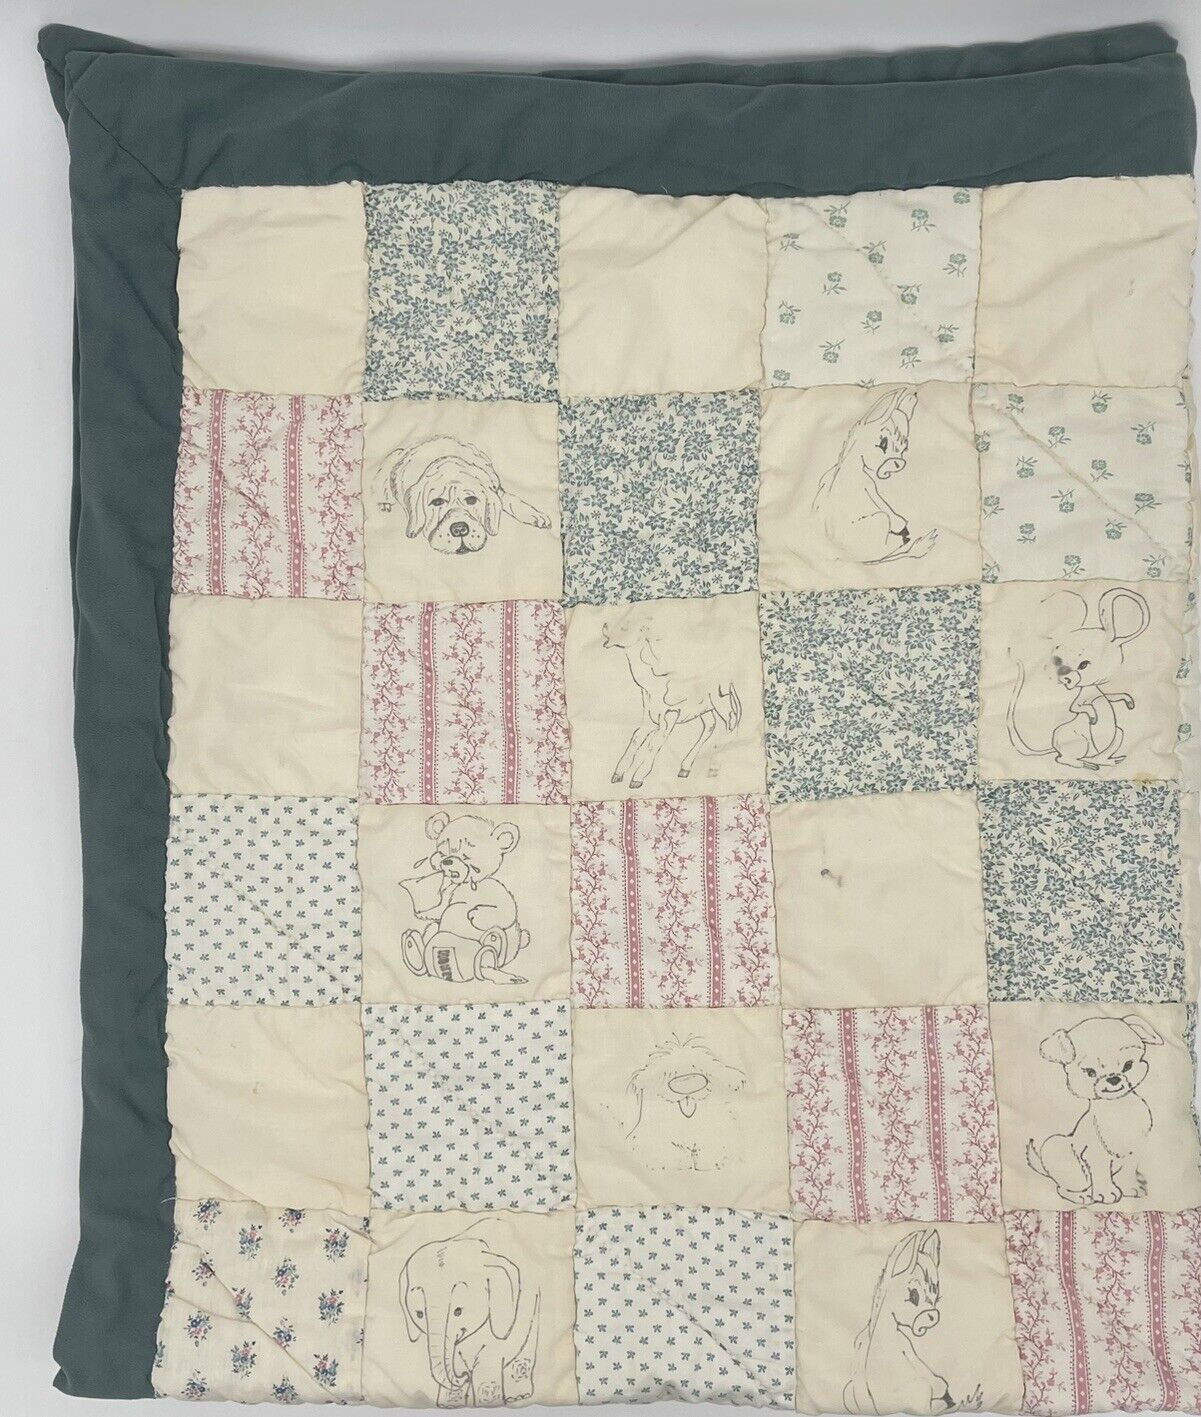 Vintage Handmade Patchwork Quilt Animal Drawings Crib Size 43.5” x 51.5”